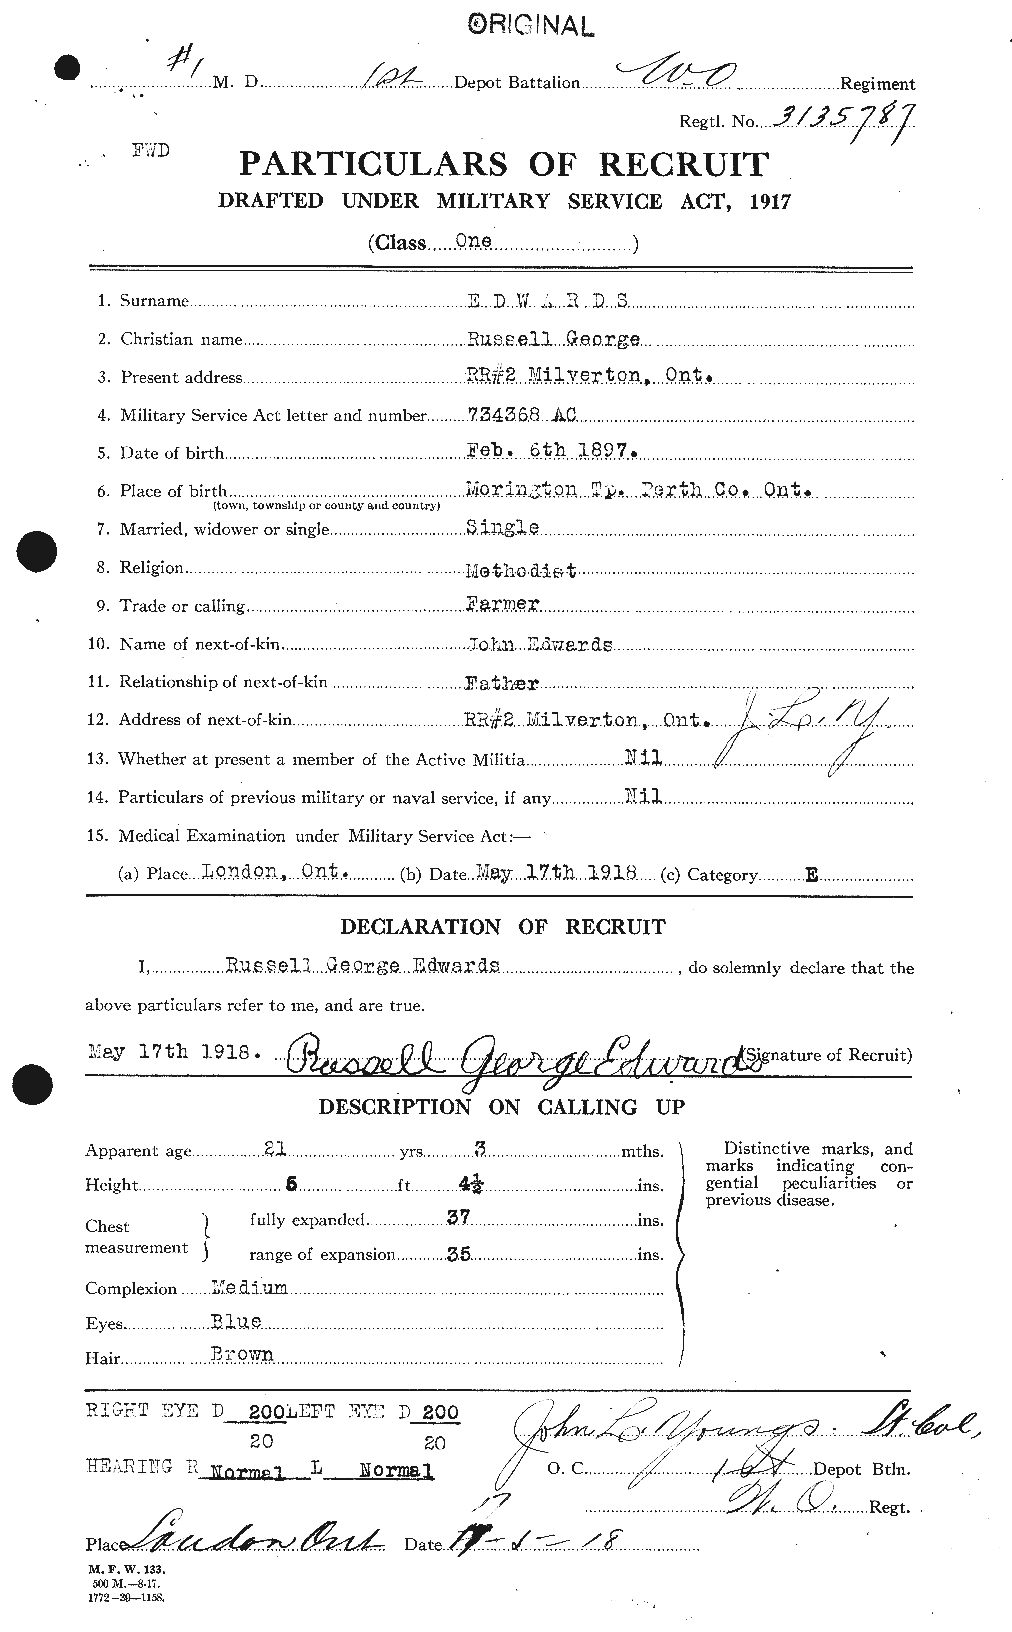 Personnel Records of the First World War - CEF 310304a